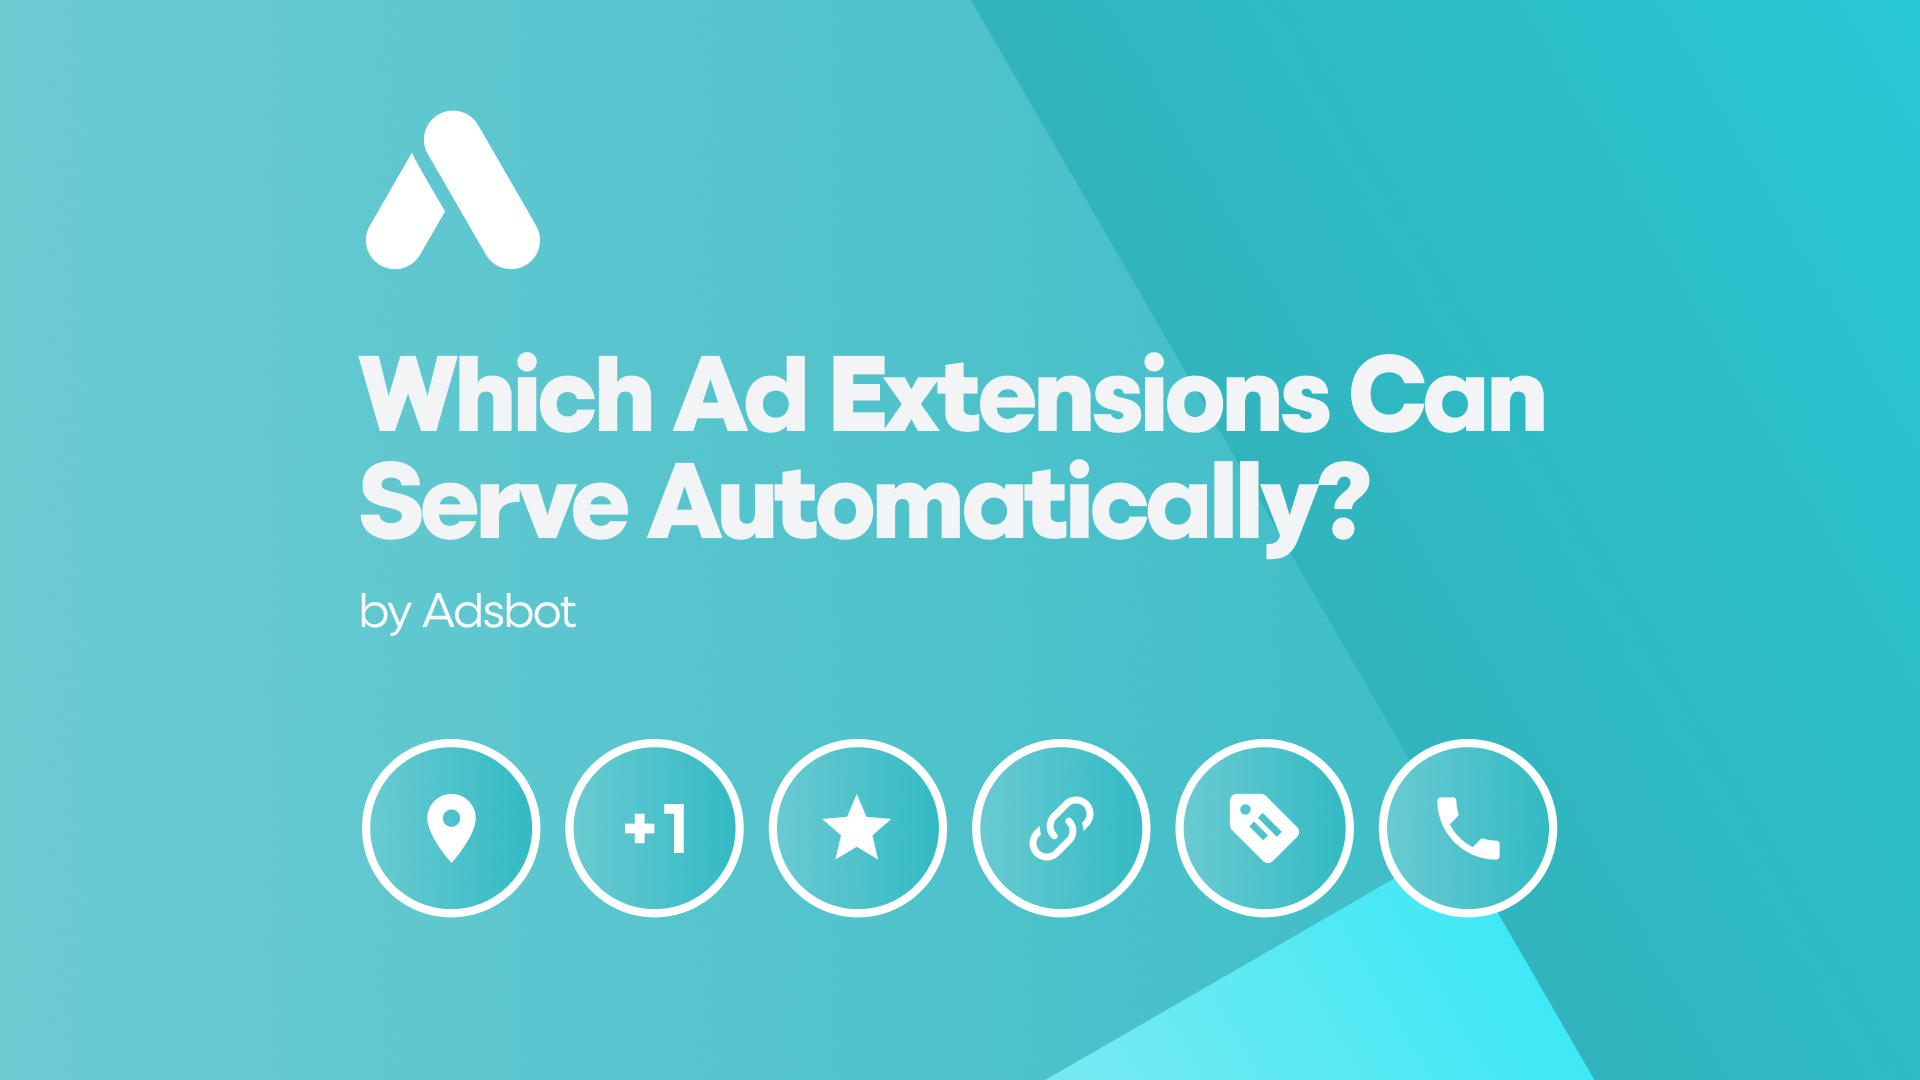 Which Ad Extensions Can Serve Automatically?